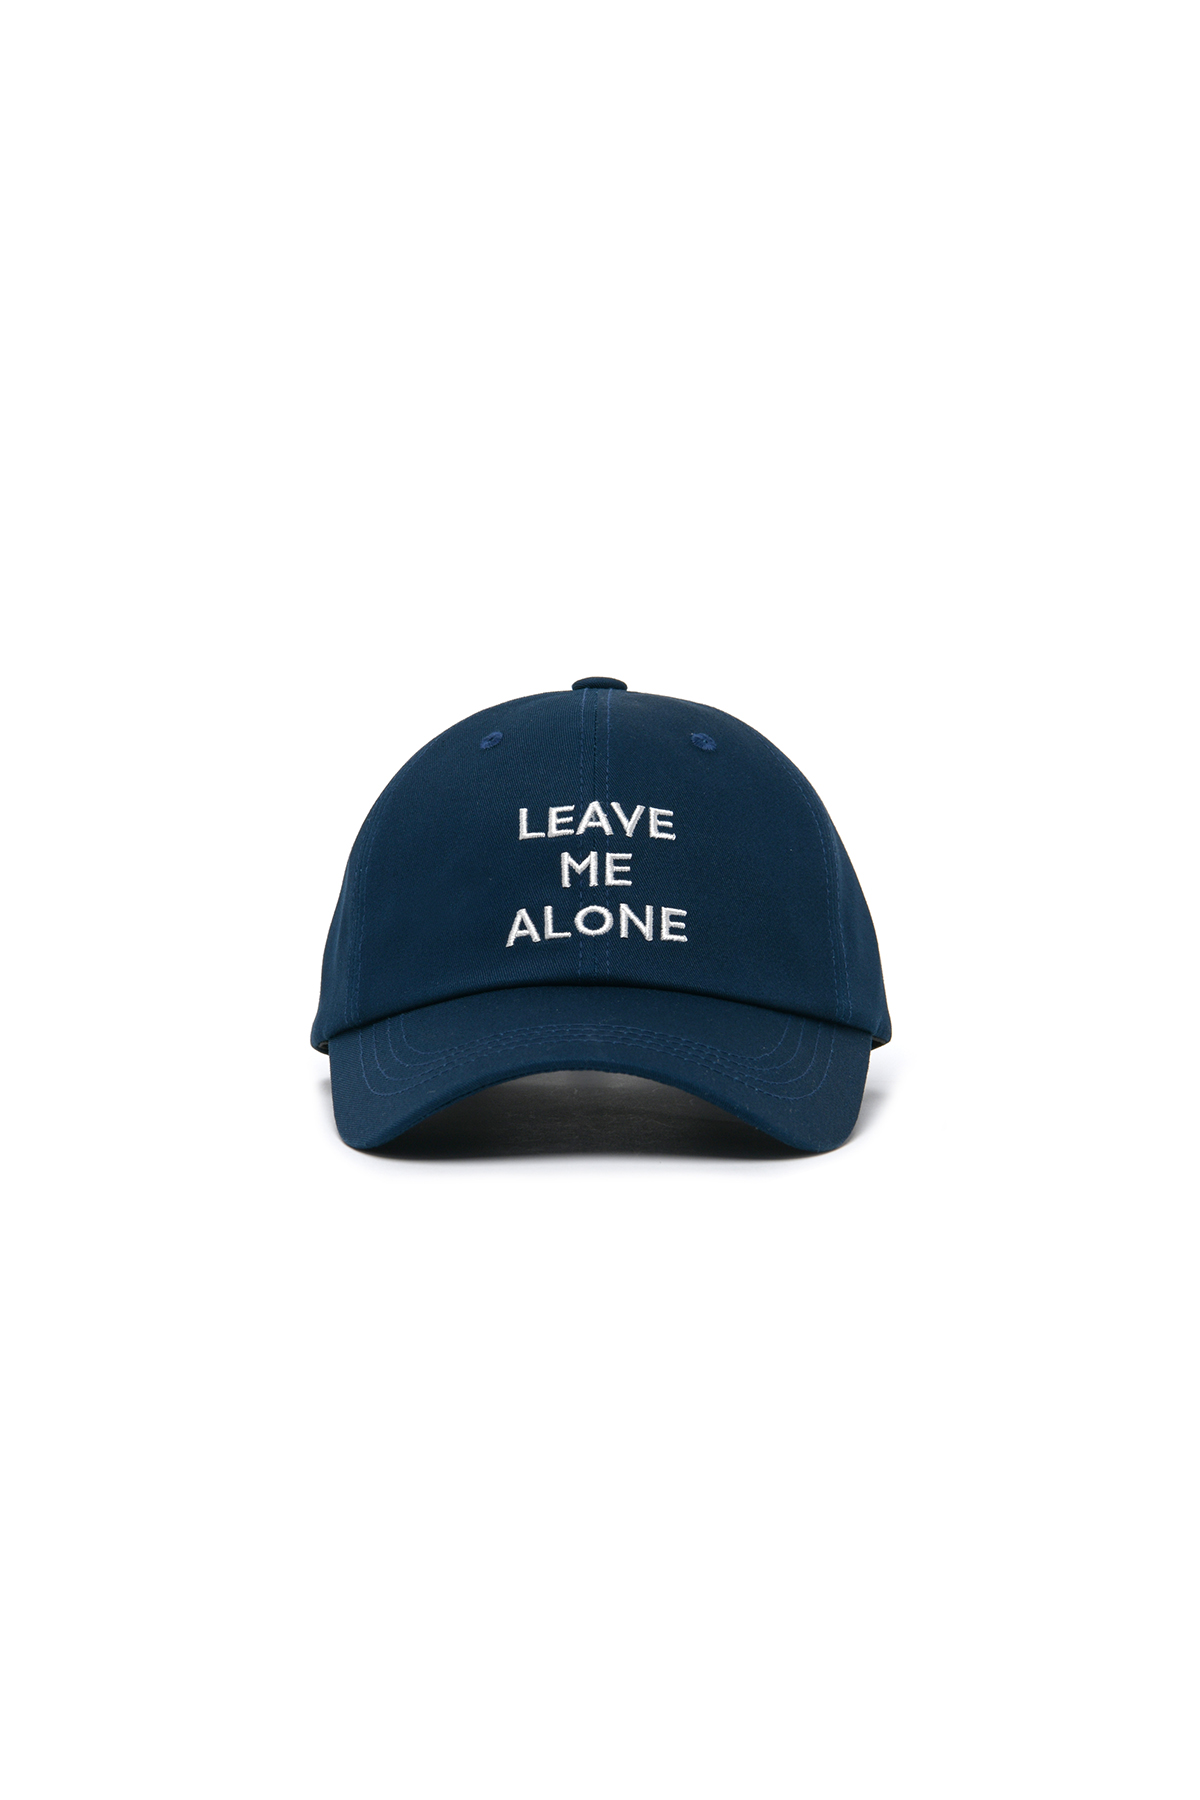 LEAVE ME ALONE EMBROIDERED BALL CAP NAVY